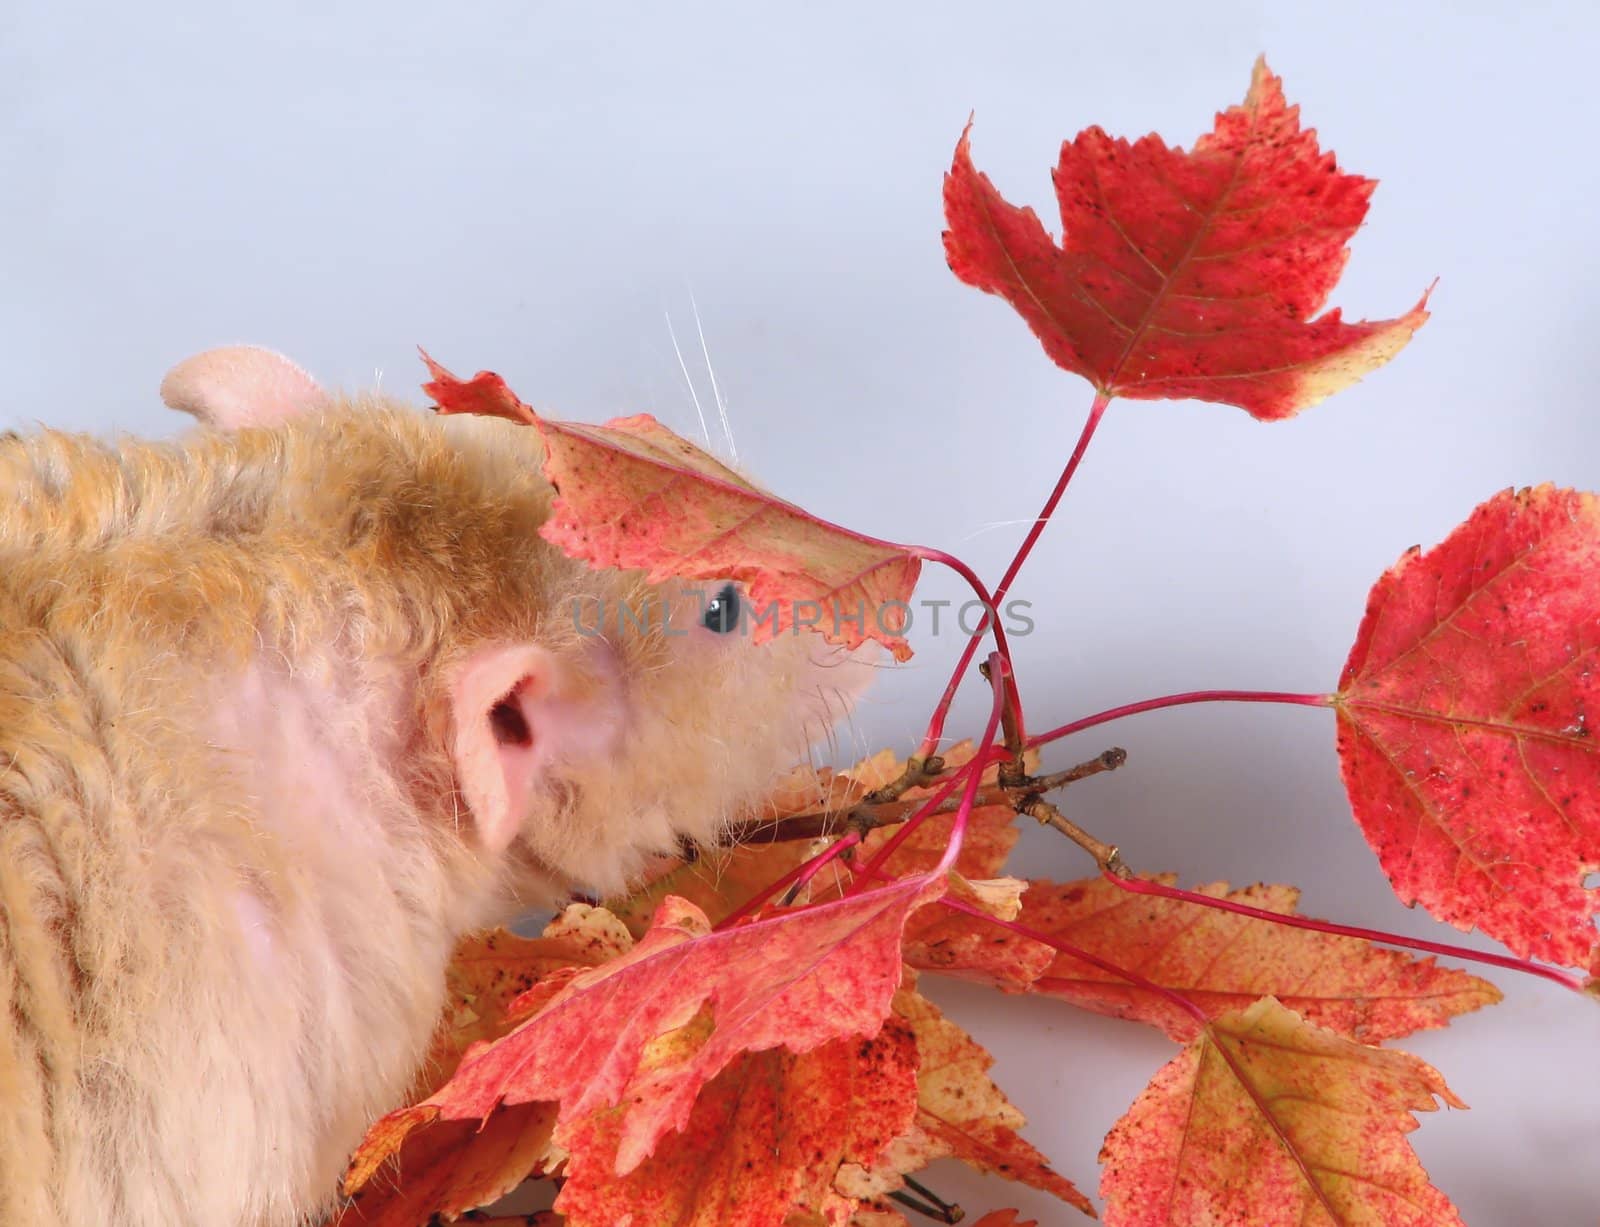 The rat sleeps under a branch with autumn leaves